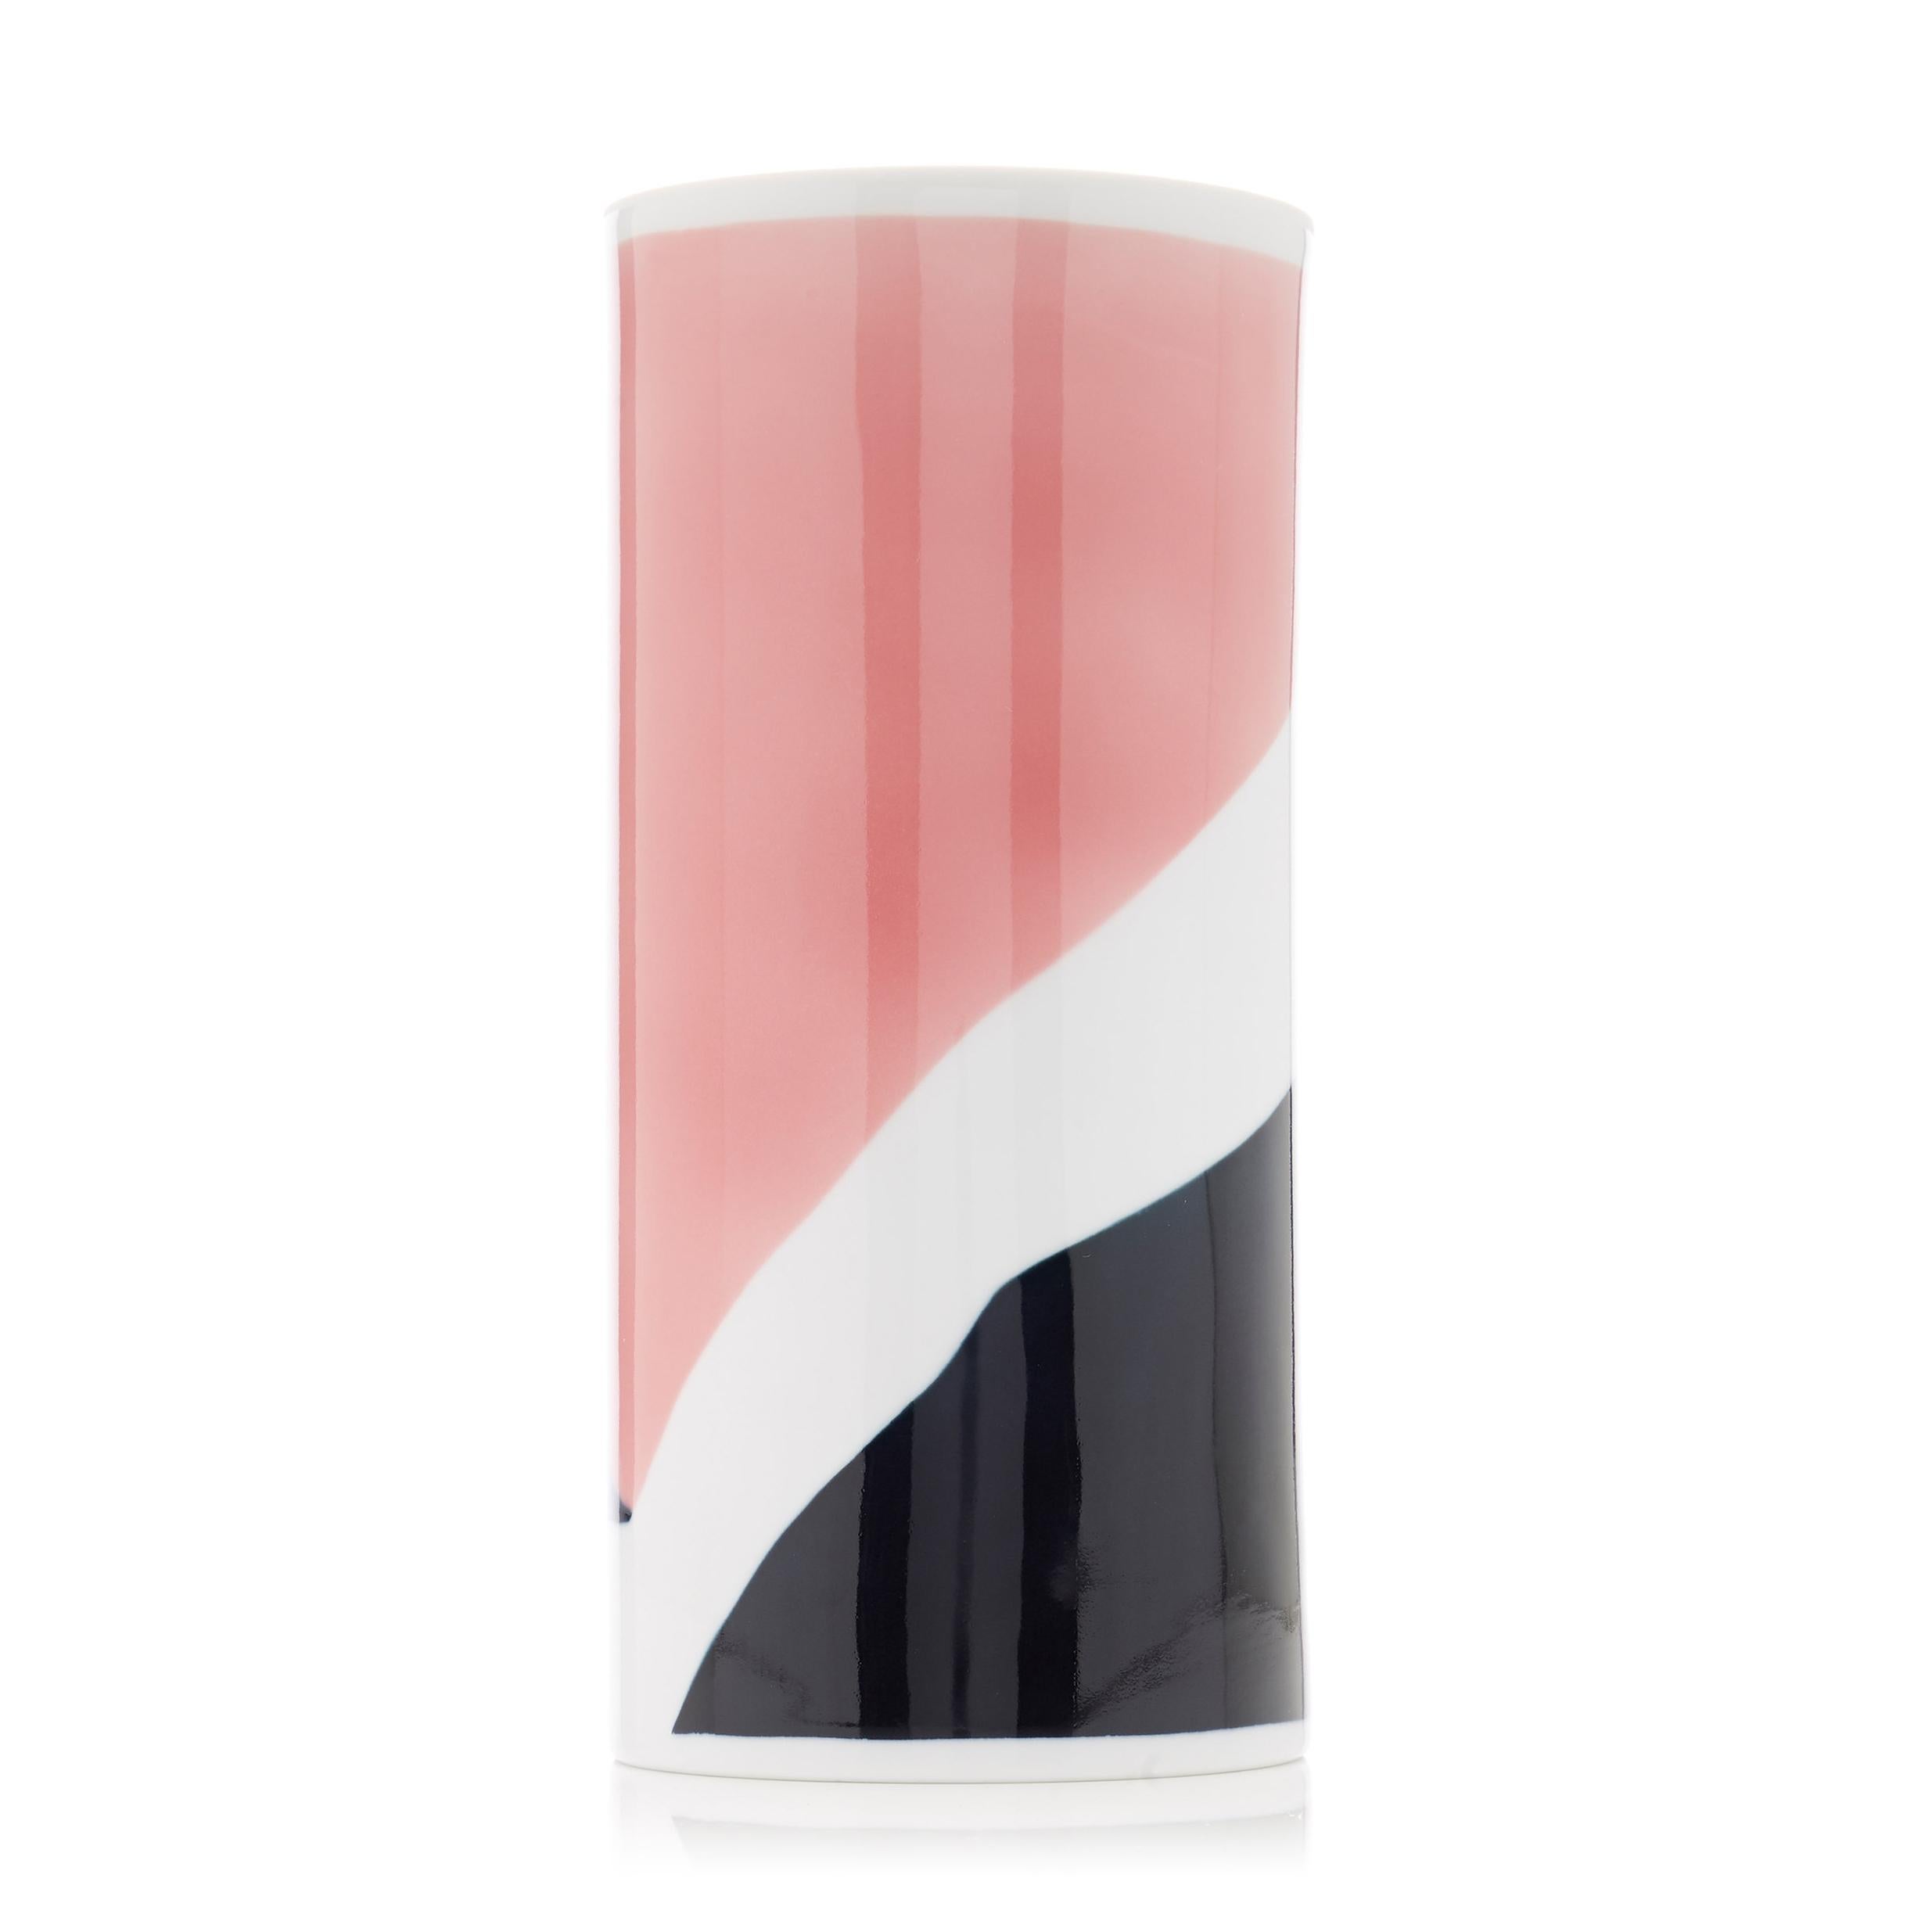 Continuing the first series of cobalt blue contrast vases on extra fine white porcelain vases, these new series of vases in color black and pink designed by VISO and handcrafted by the artisans at Sargadelos become the perfect compliment for a Viso